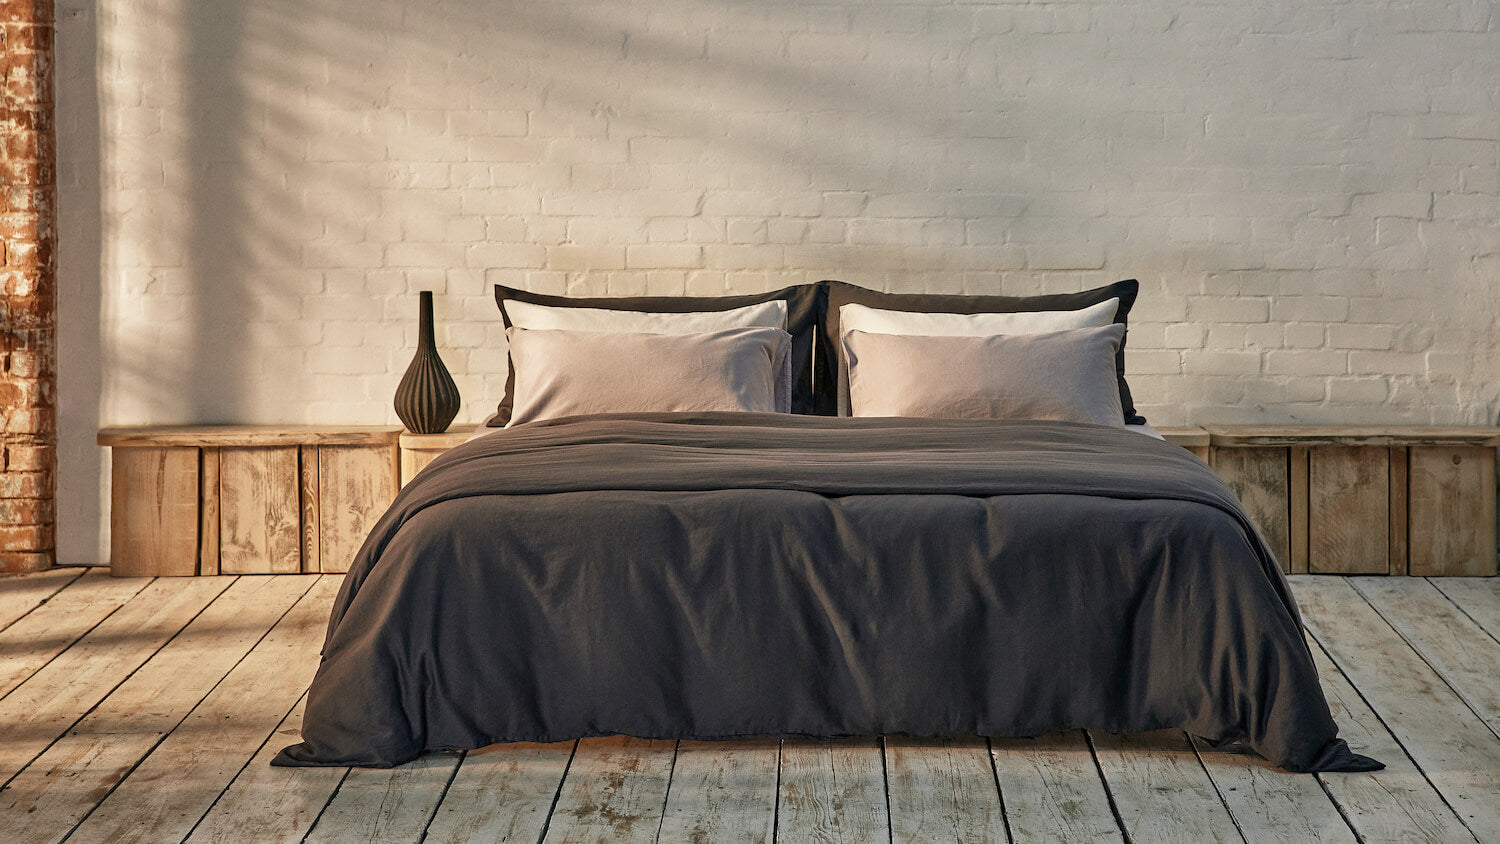 dark grey and light grey bedding mix and match on bed in a modern room